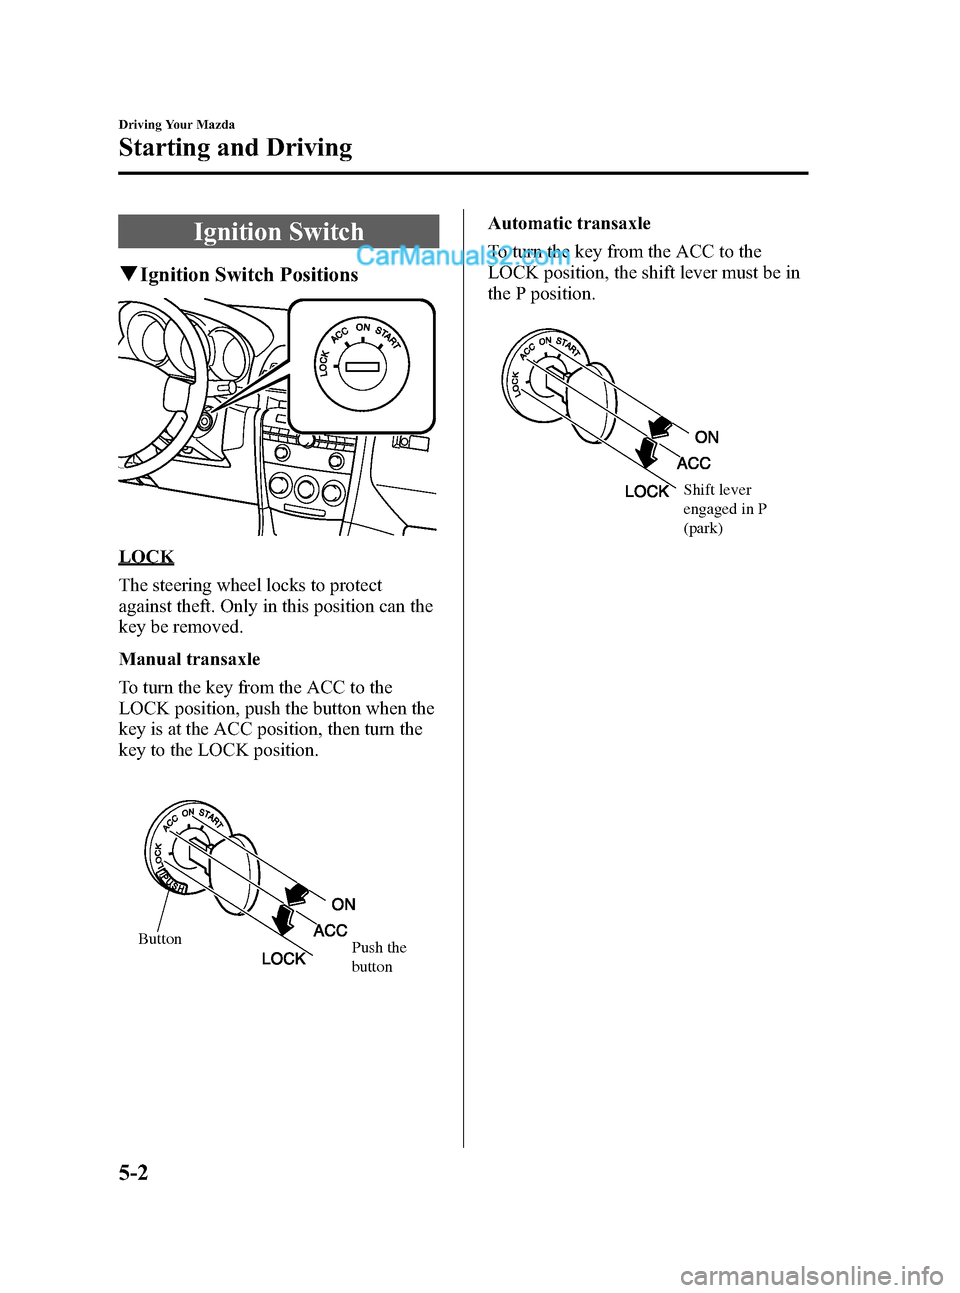 MAZDA MODEL MAZDASPEED 3 2008  Owners Manual (in English) Black plate (120,1)
Ignition Switch
qIgnition Switch Positions
LOCK
The steering wheel locks to protect
against theft. Only in this position can the
key be removed.
Manual transaxle
To turn the key fr